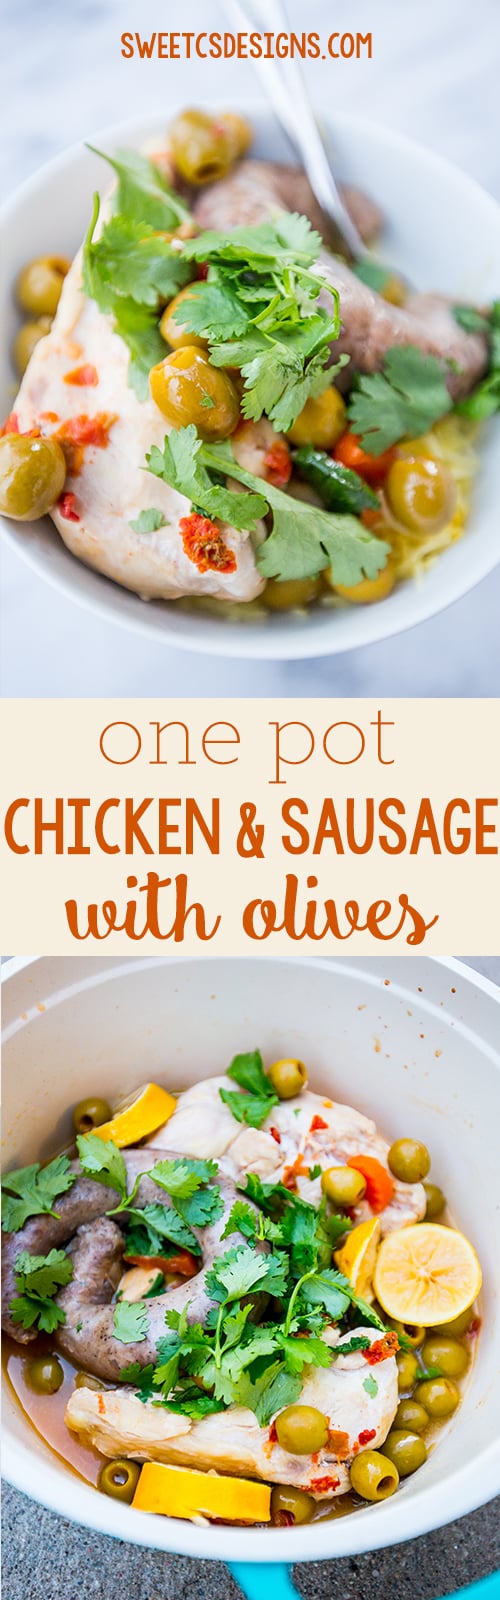 one pot chicken and sausage with olives- you wont believe how amazing this four ingredient dish tastes!